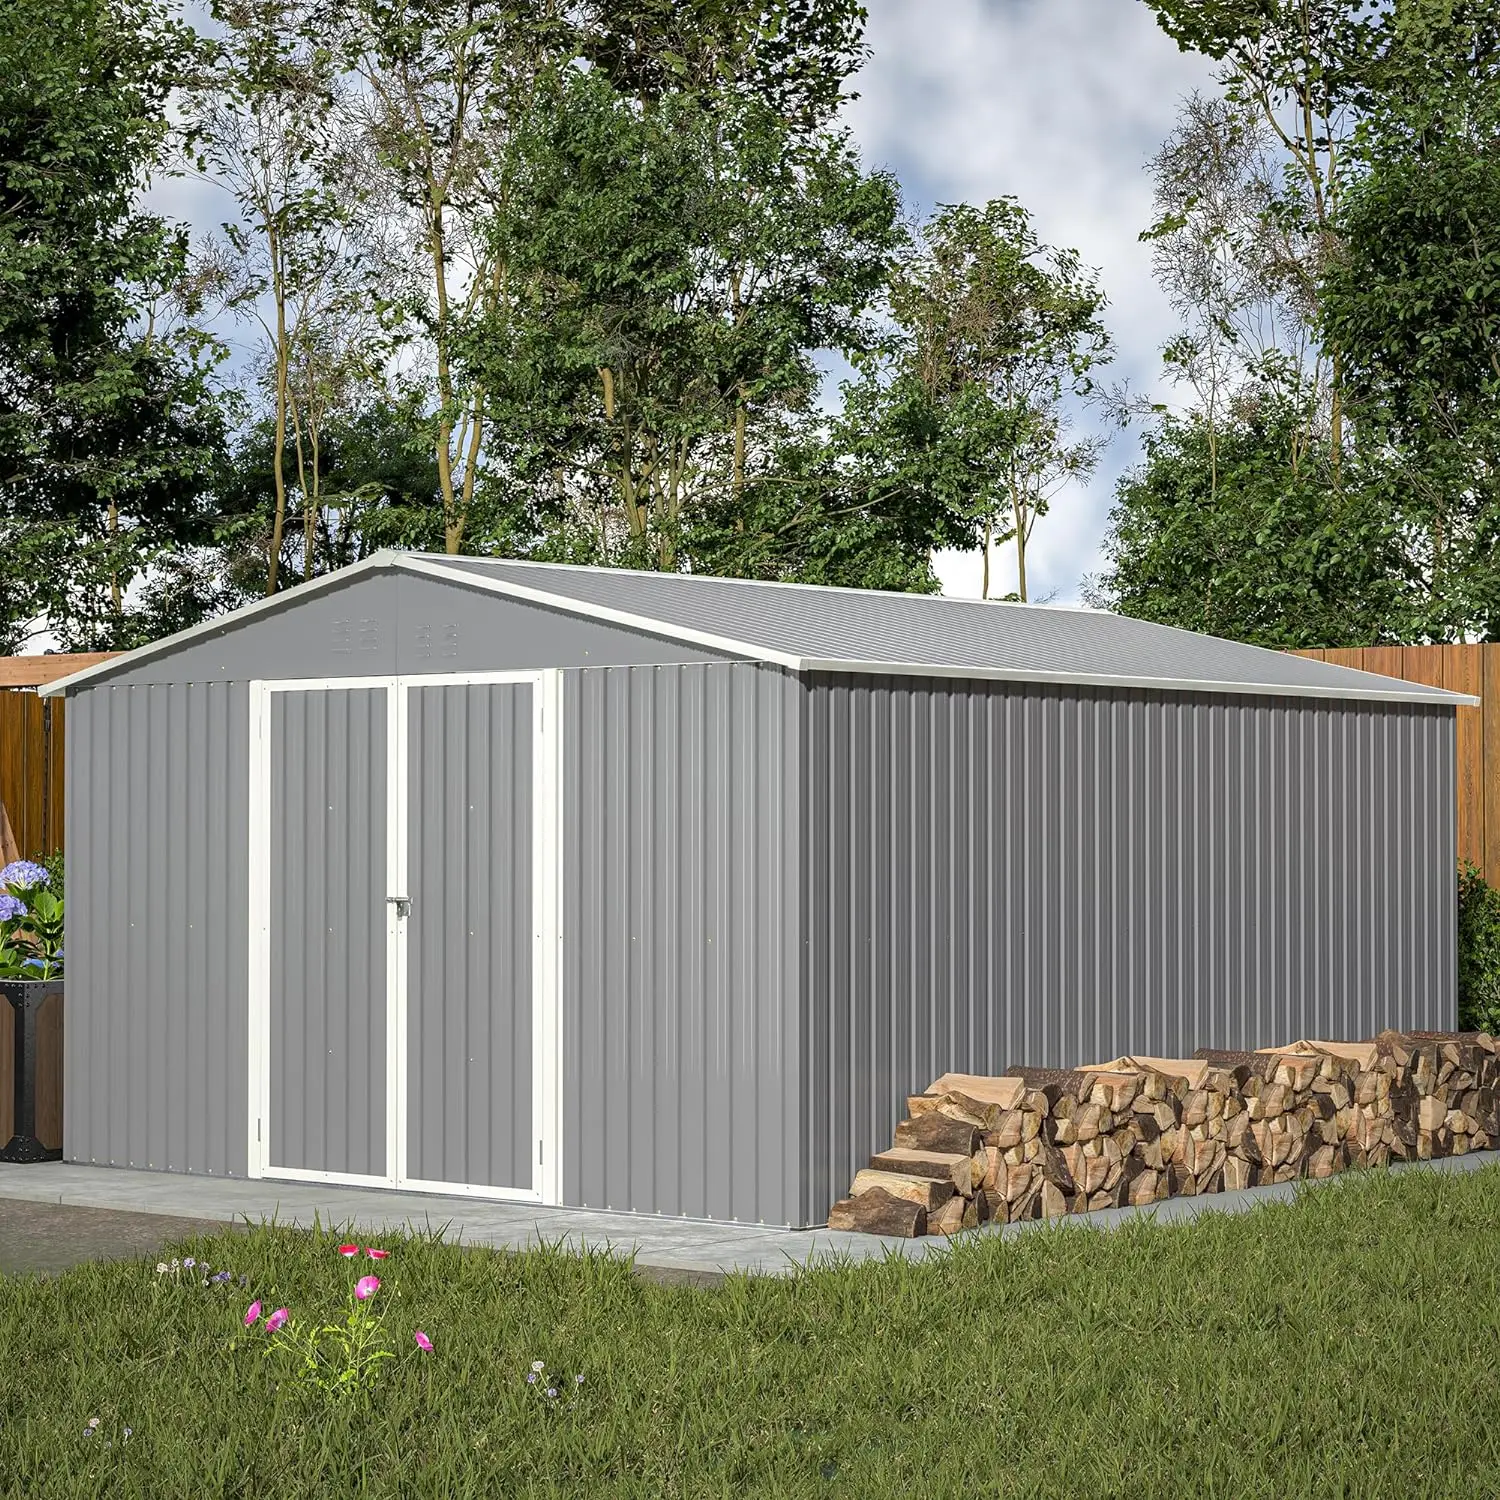 Outdoor Storage Shed, Metal Shed Tool Steel Cabin Tool Garden Shed, Garden Tool House for Patio Backyard Lawn Garden